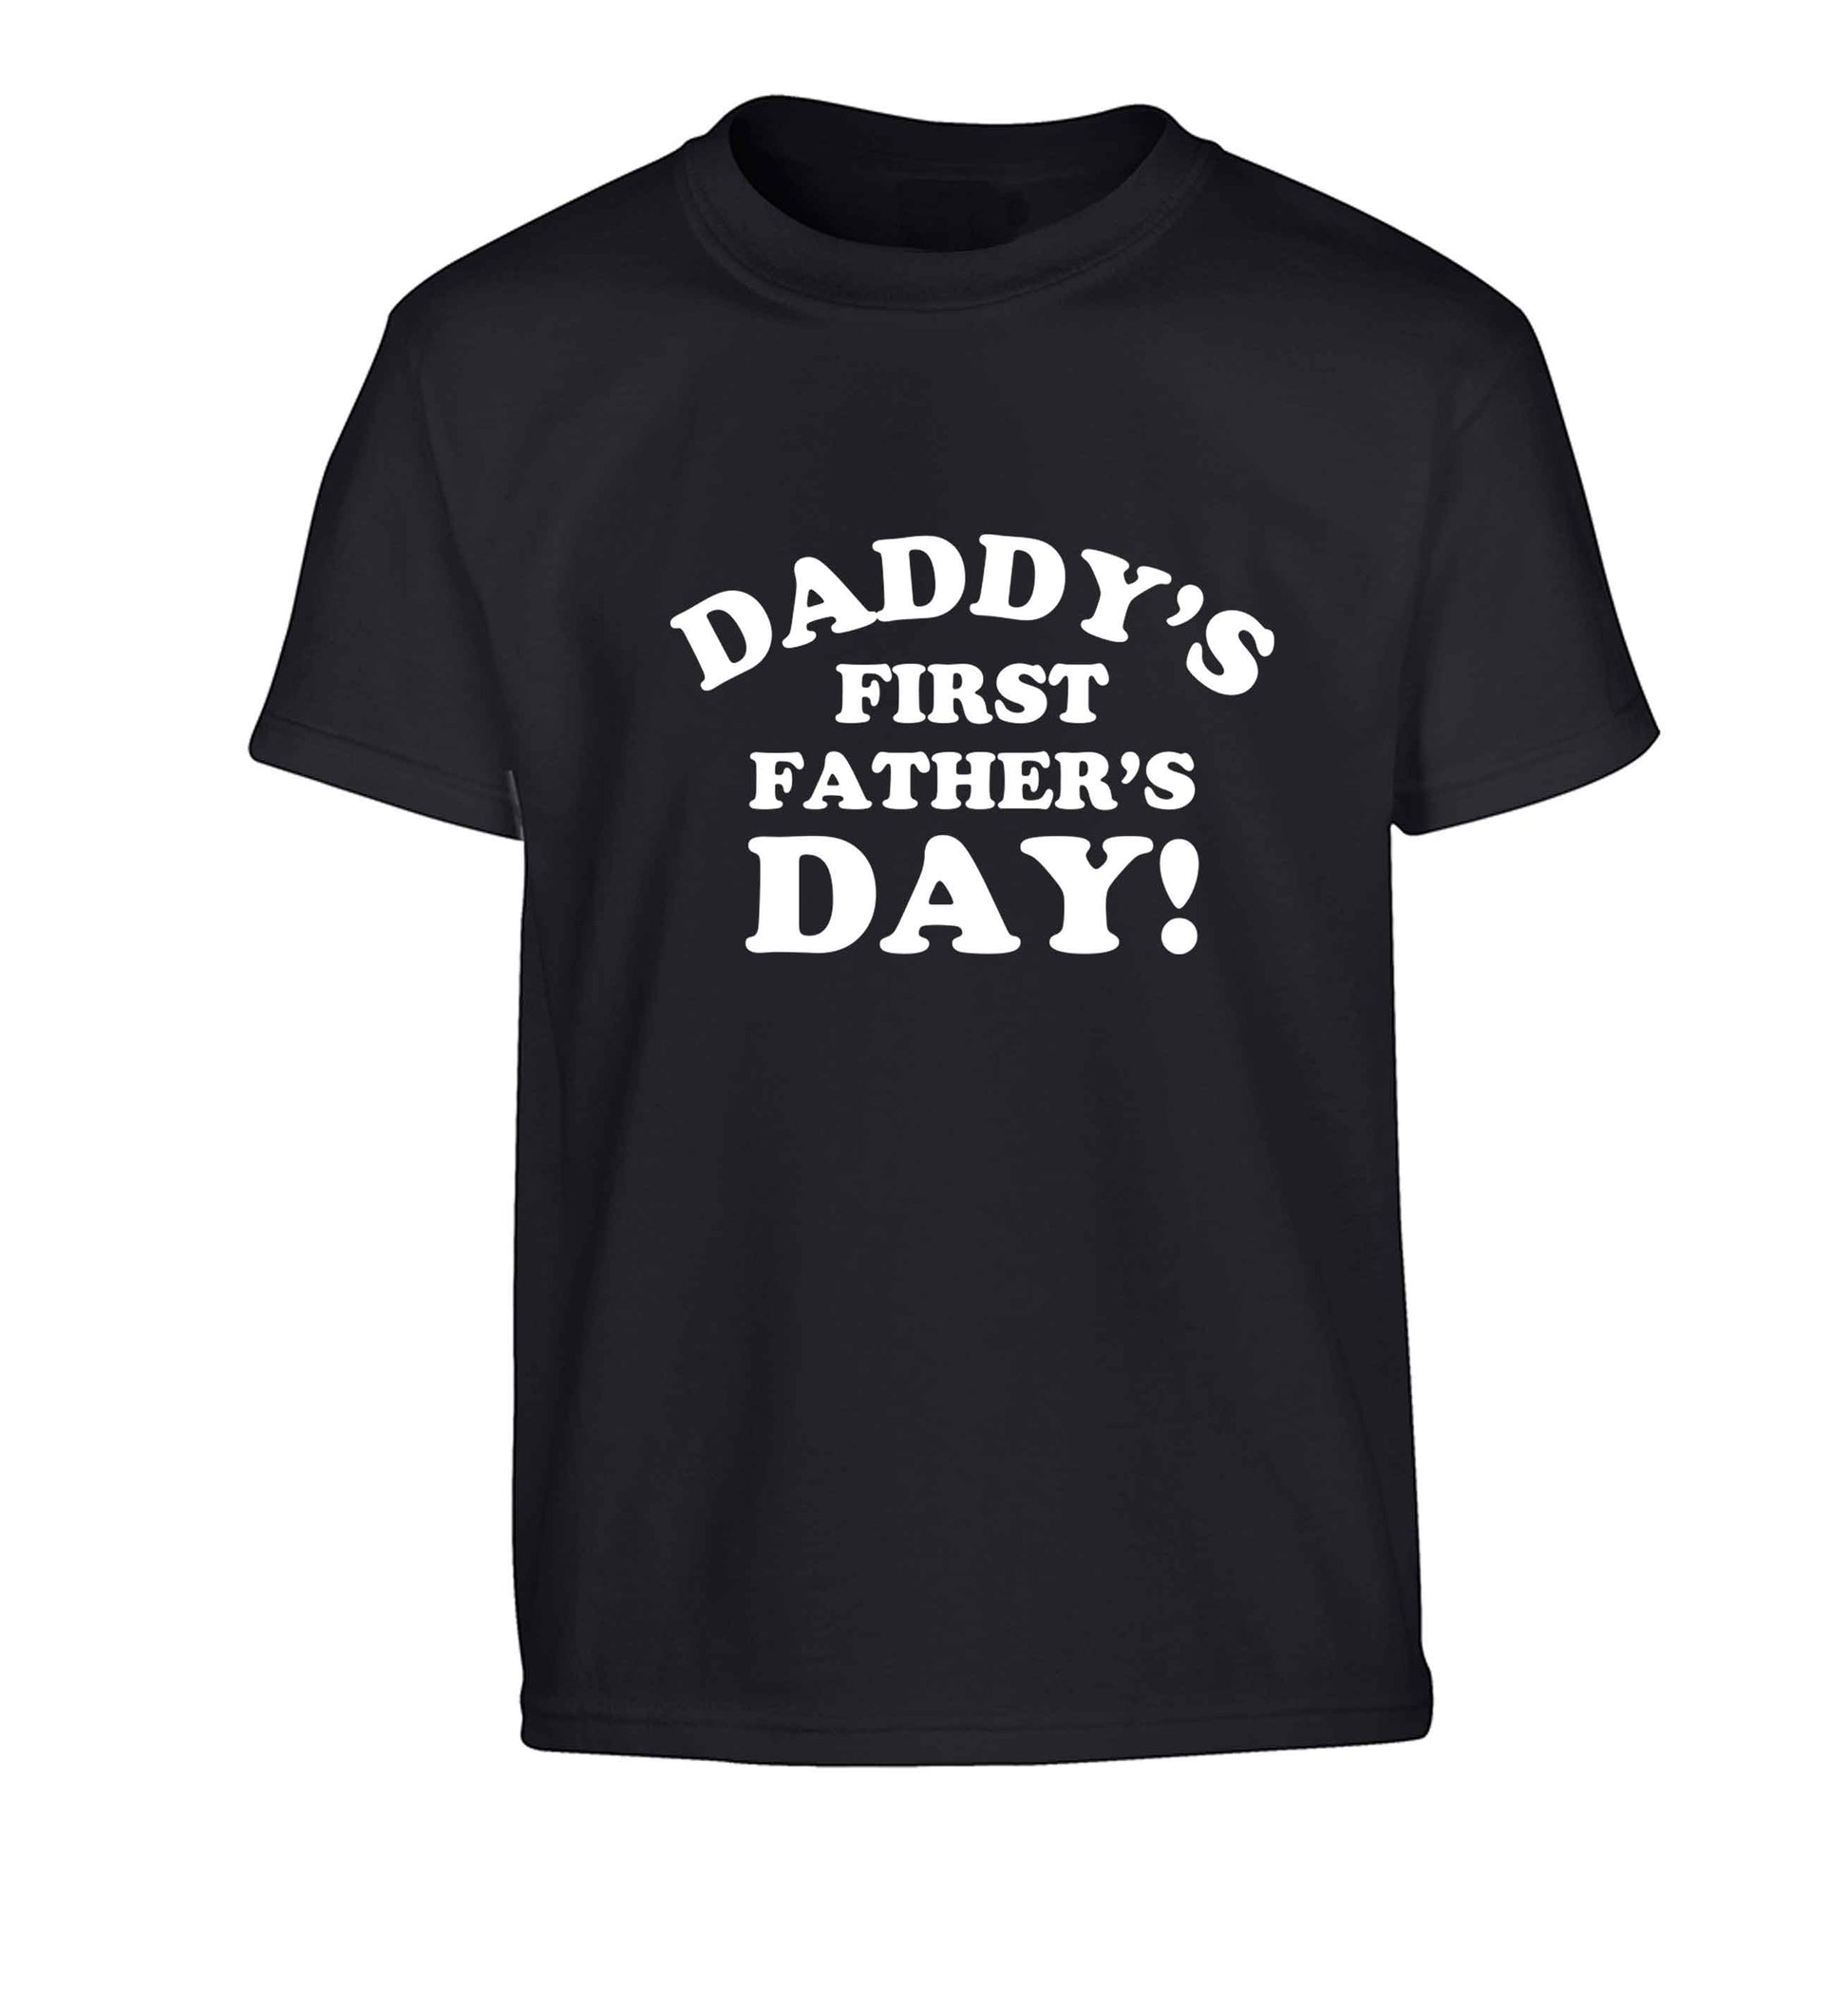 Daddy's first father's day Children's black Tshirt 12-13 Years